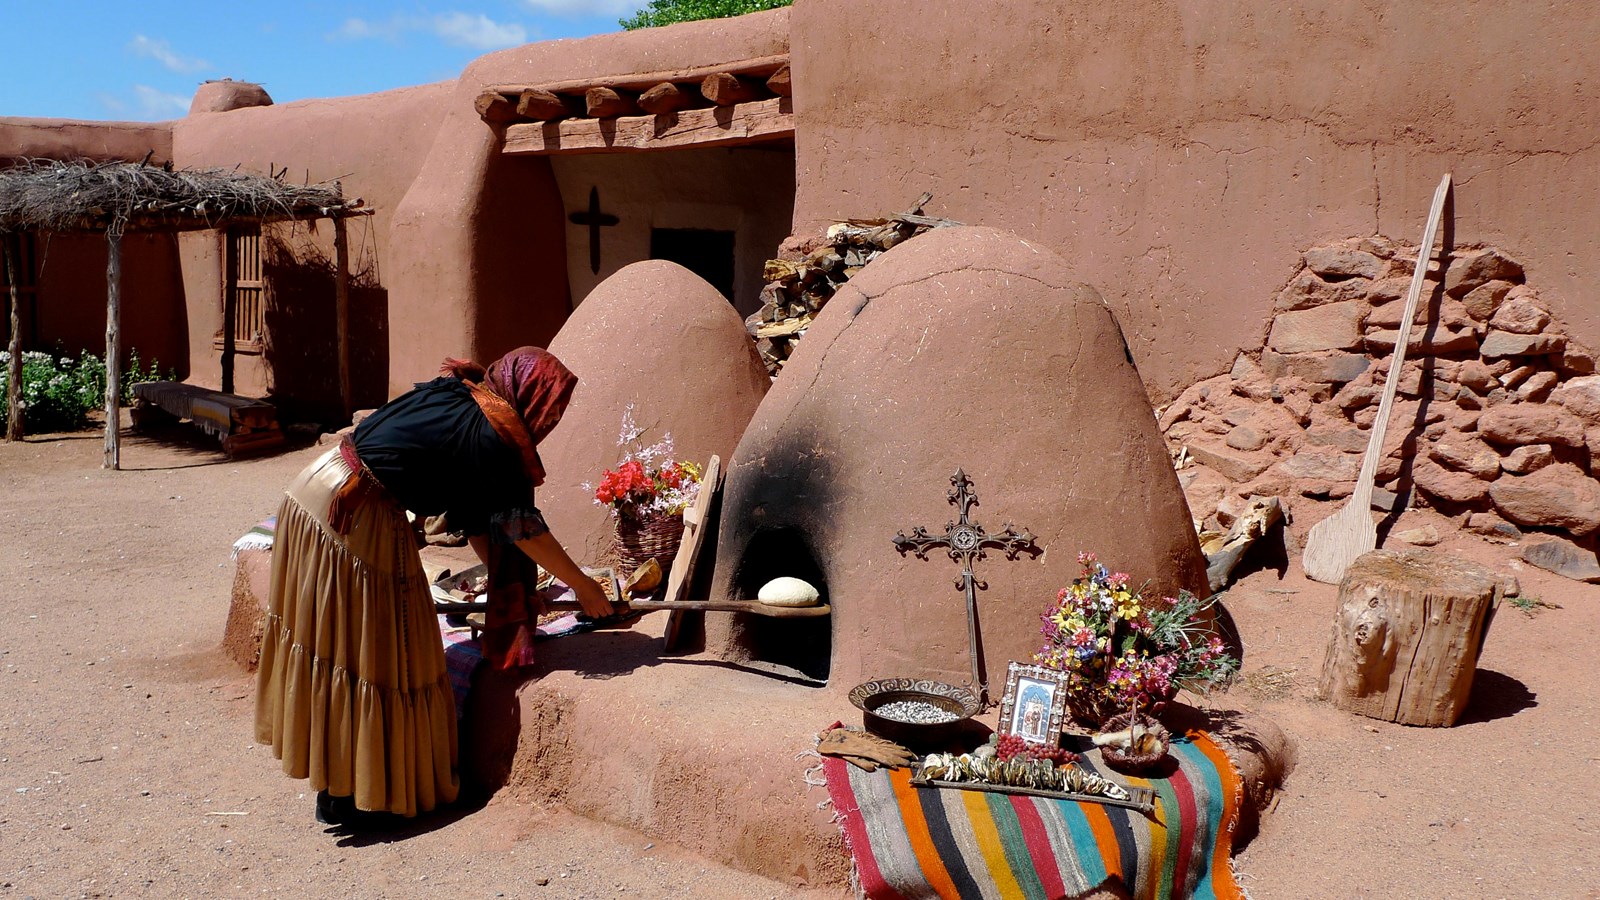 A woman puts something into an earthen oven